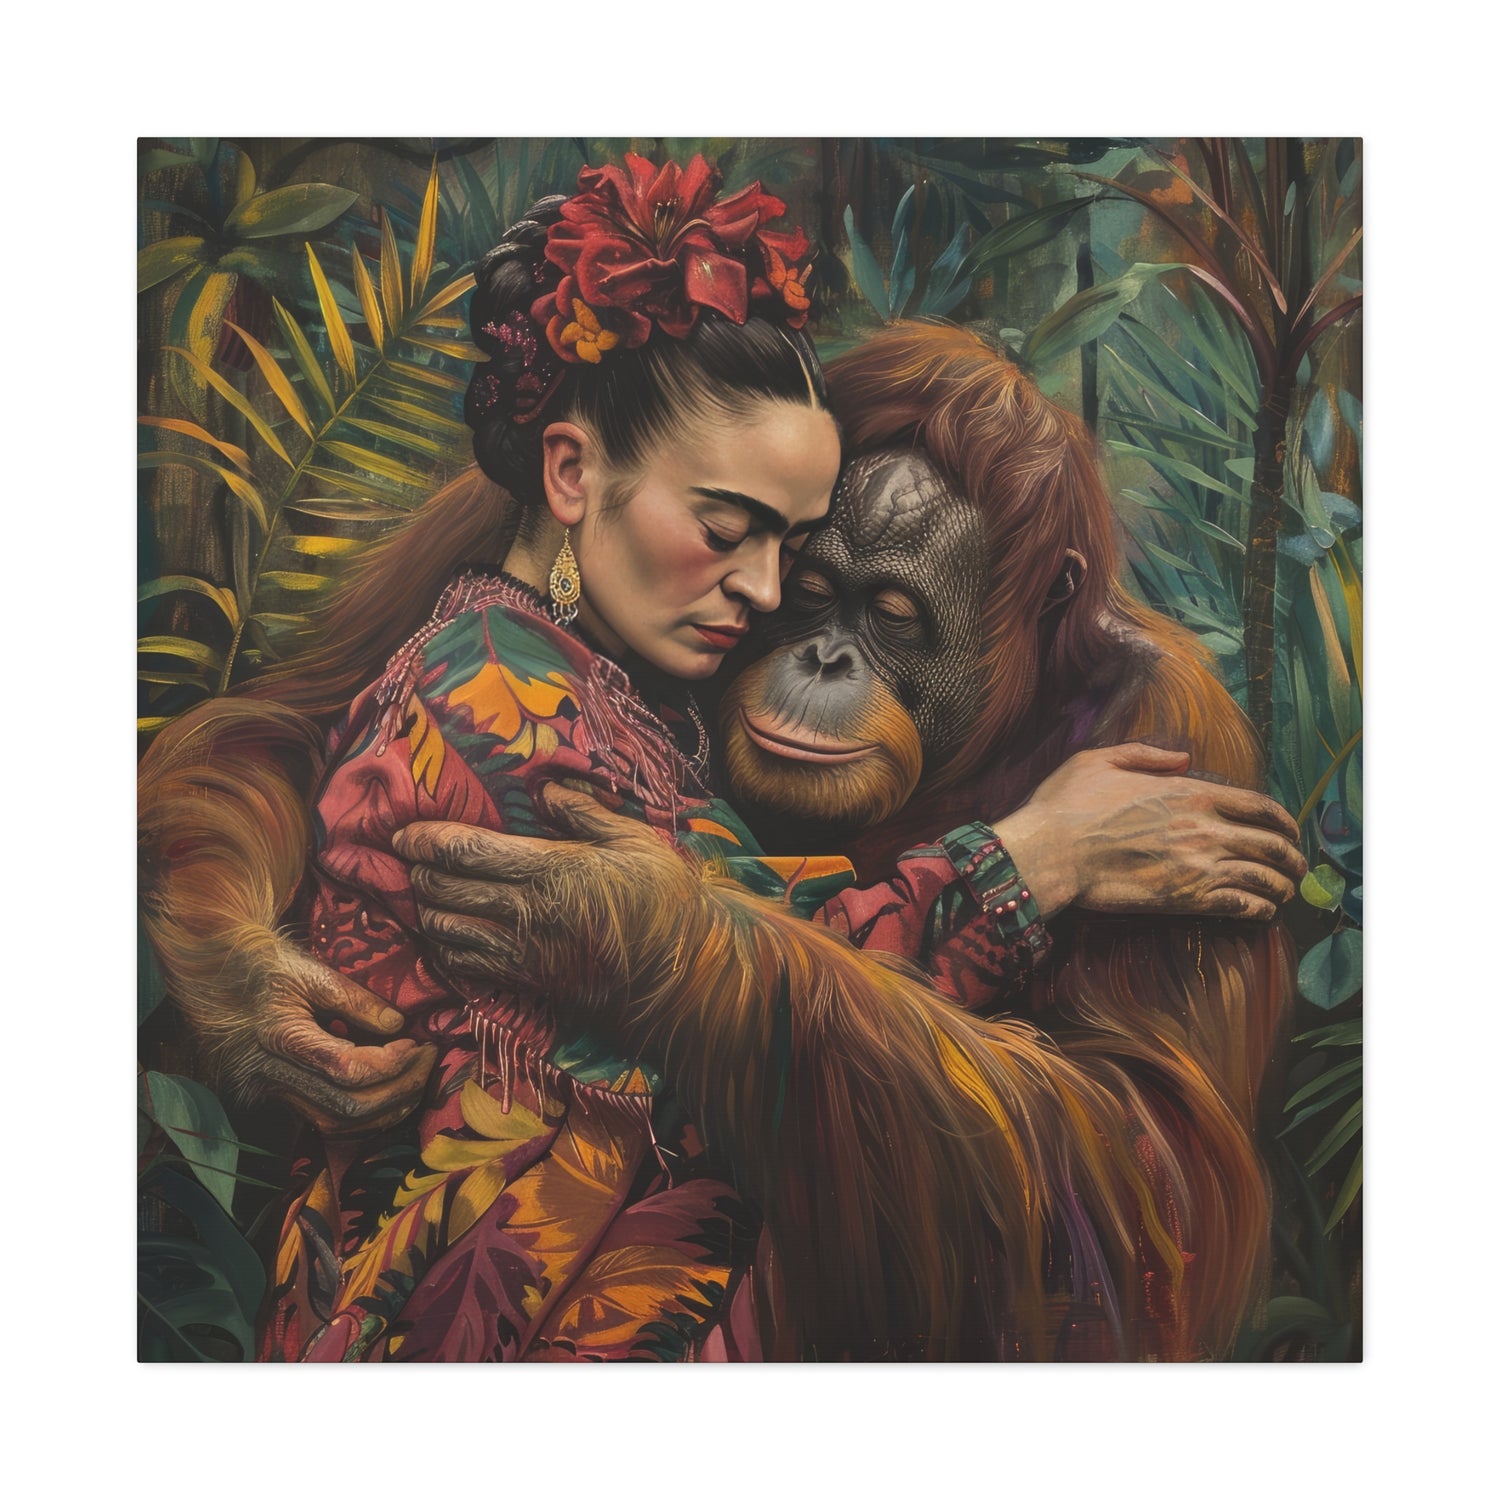 David Miller. Embrace of the Wild. Exclusive Canvas Print.